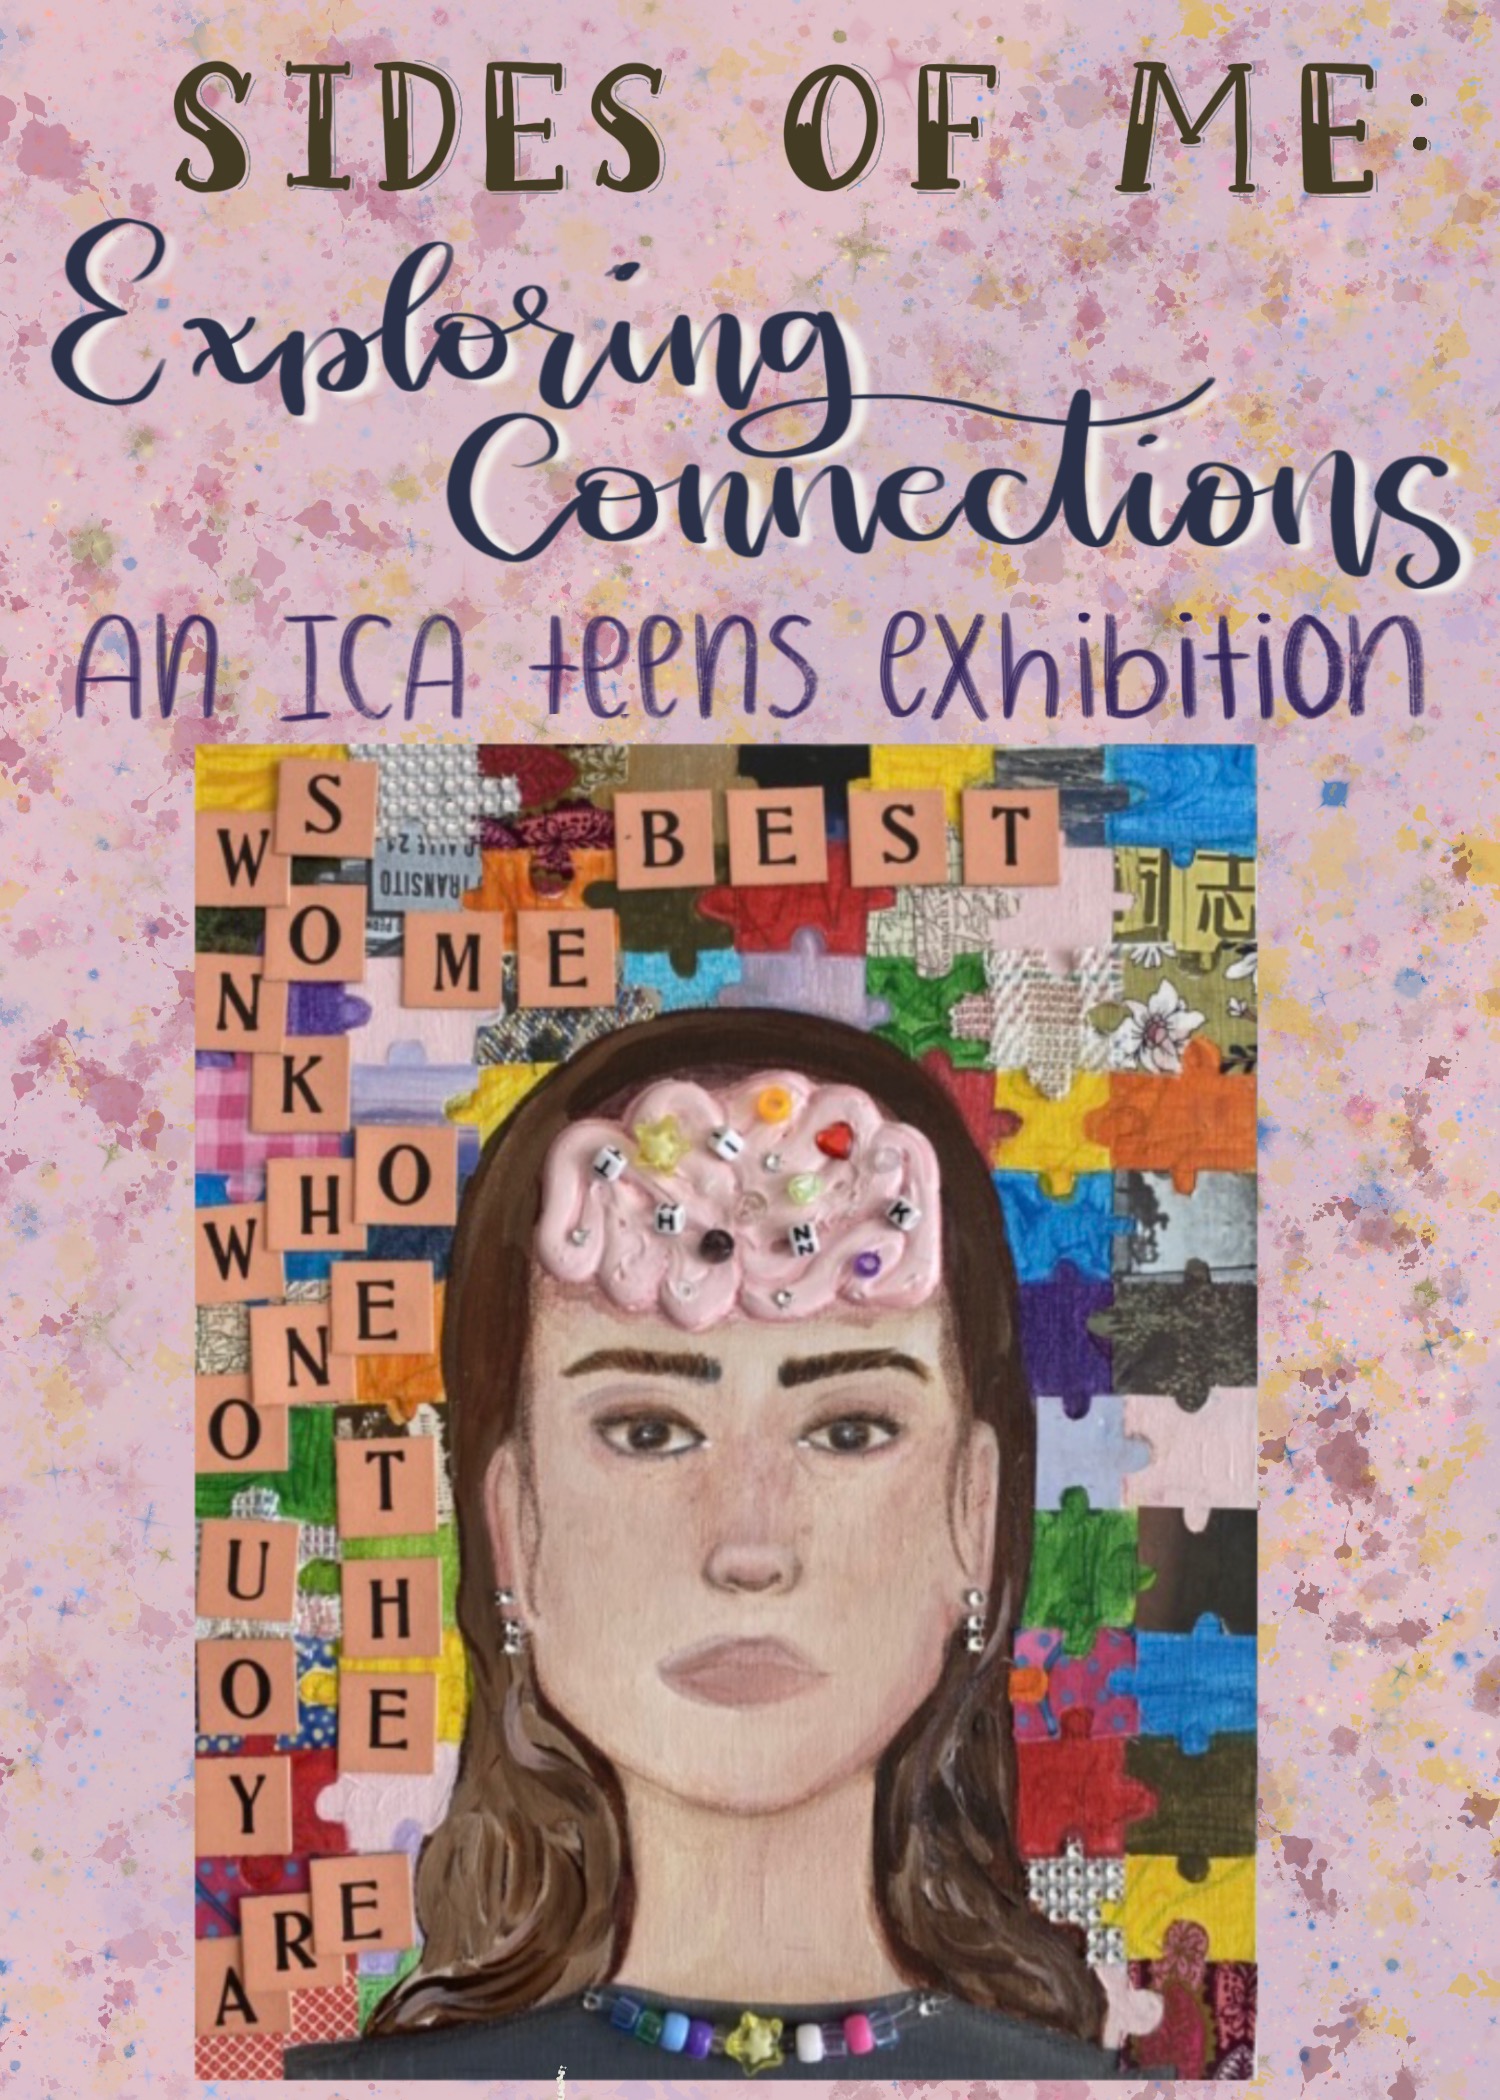 Poster for event with digital collage of an illustrated girl